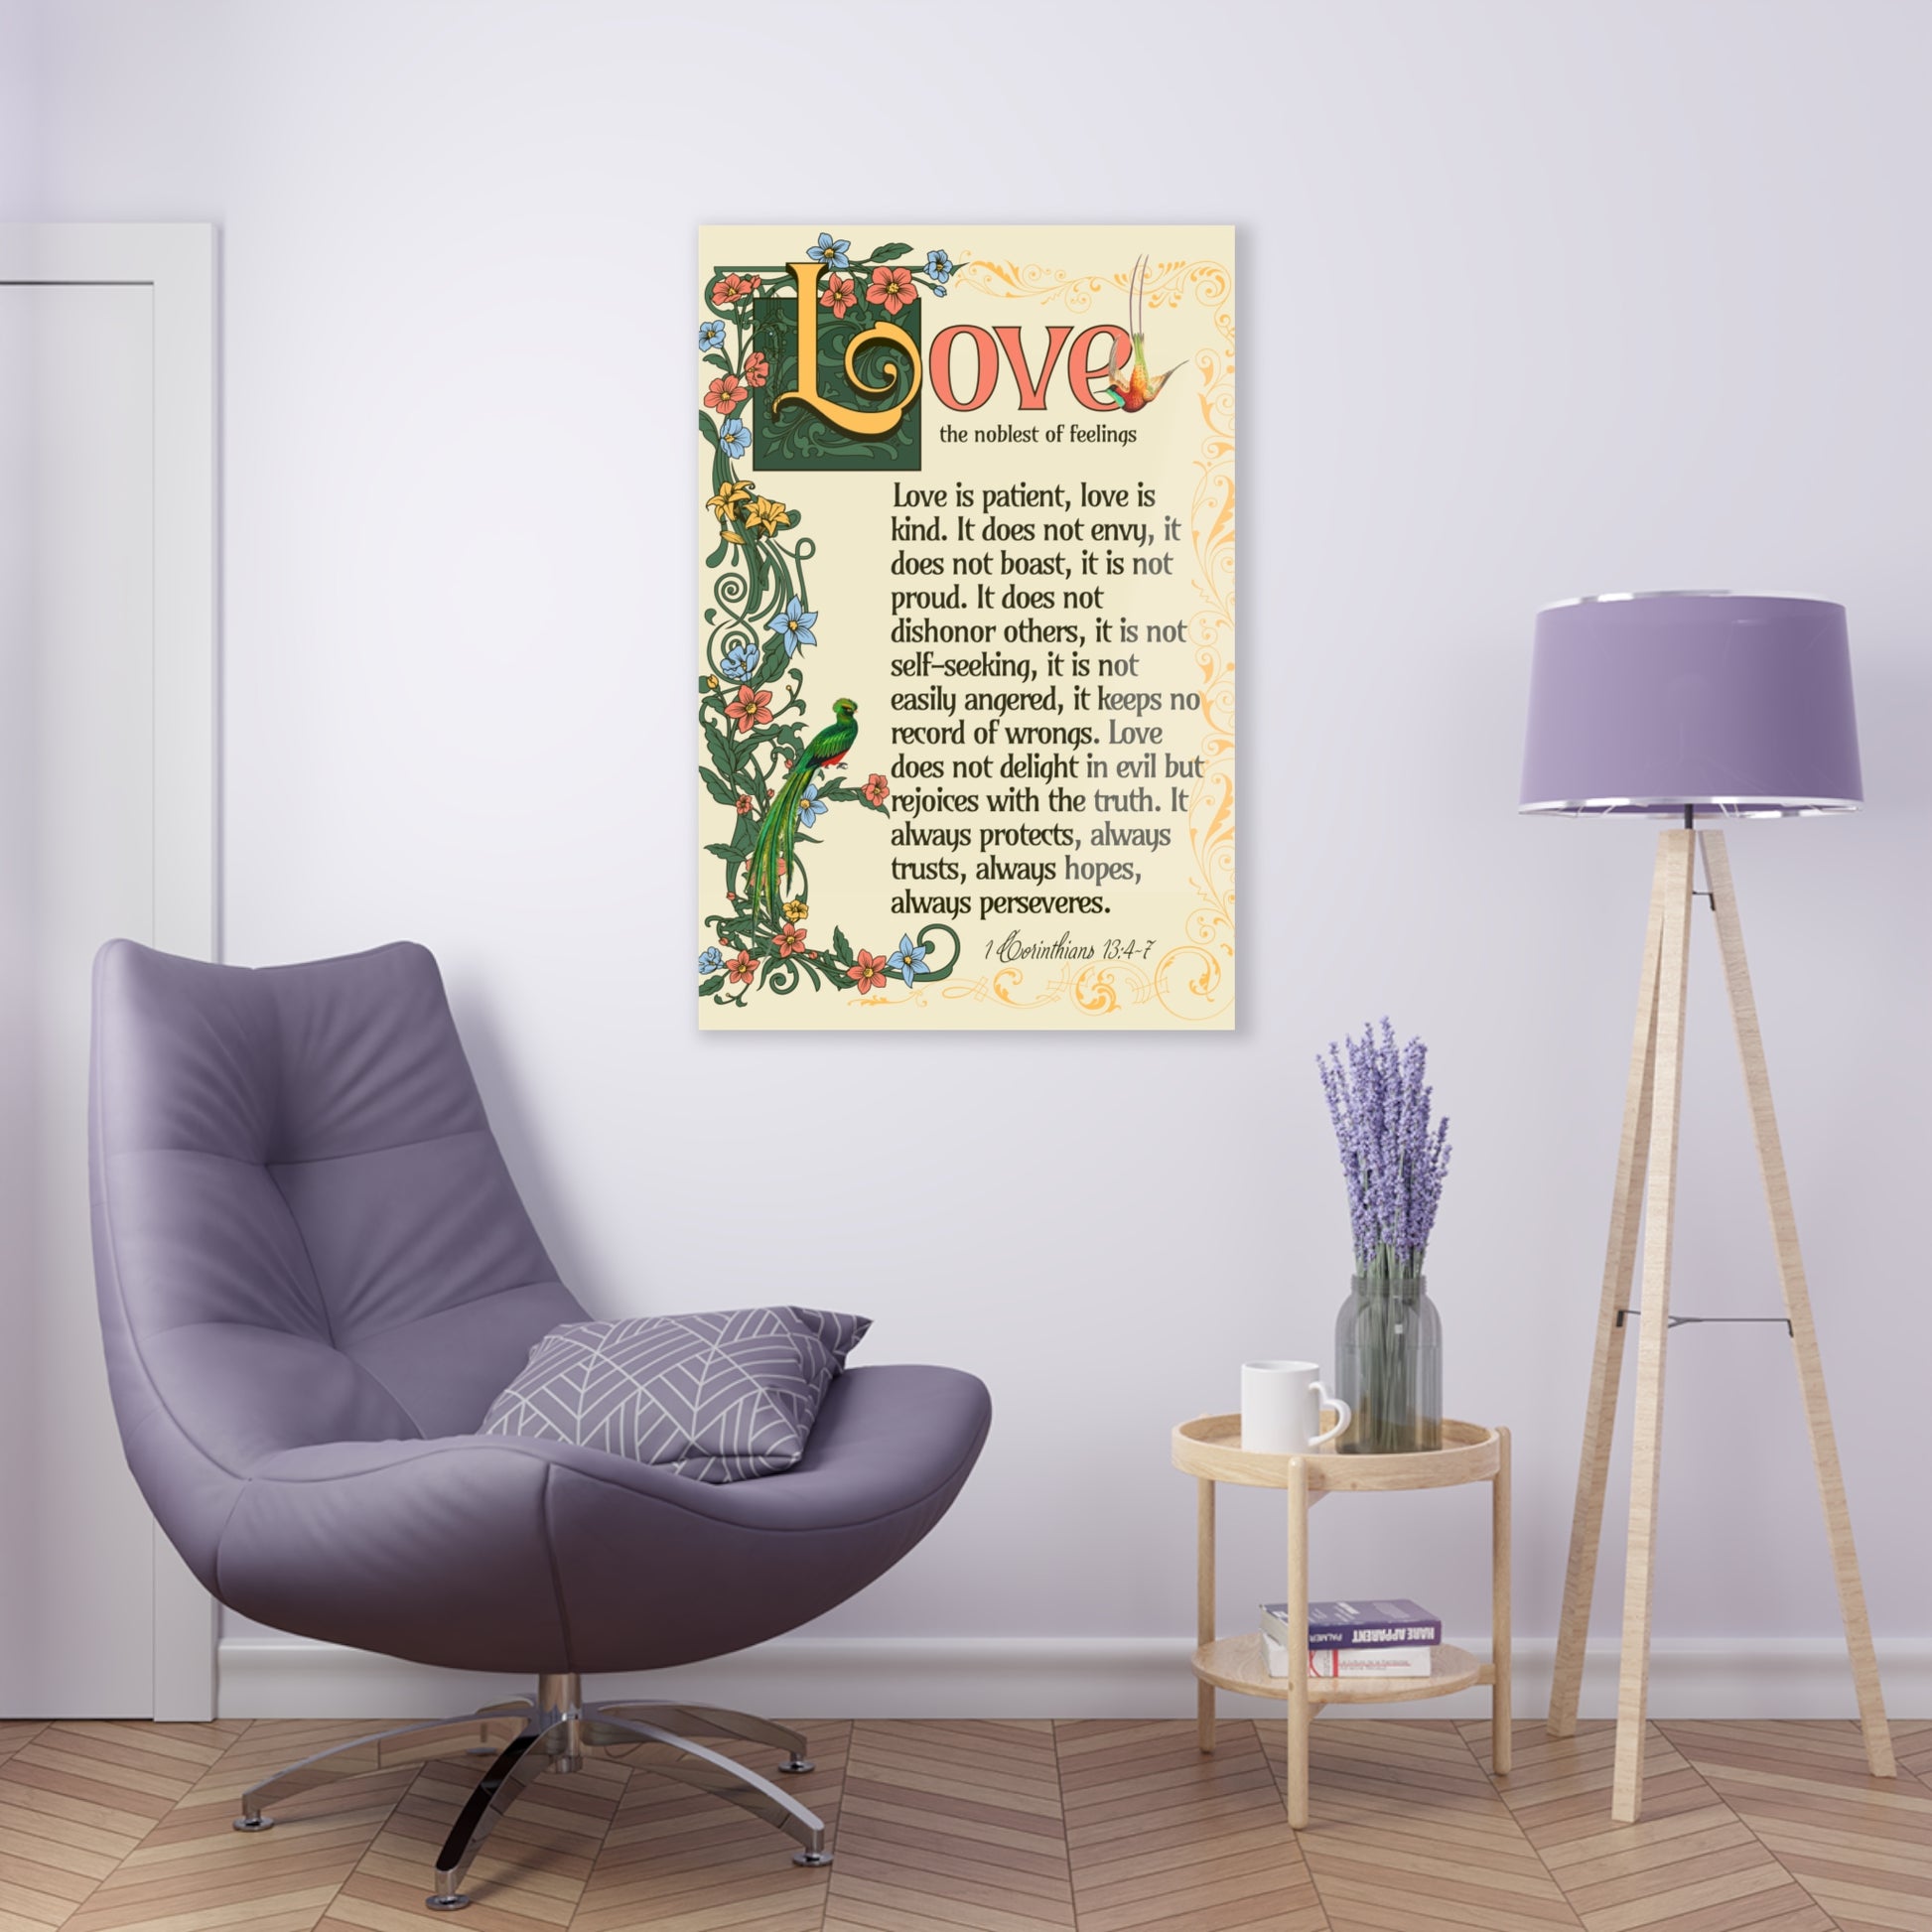 Acrylic Wall Scripture Art - Love Is Patient | Art & Wall Decor,Assembled in the USA,Assembled in USA,Decor,Home & Living,Home Decor,Indoor,Made in the USA,Made in USA,Poster